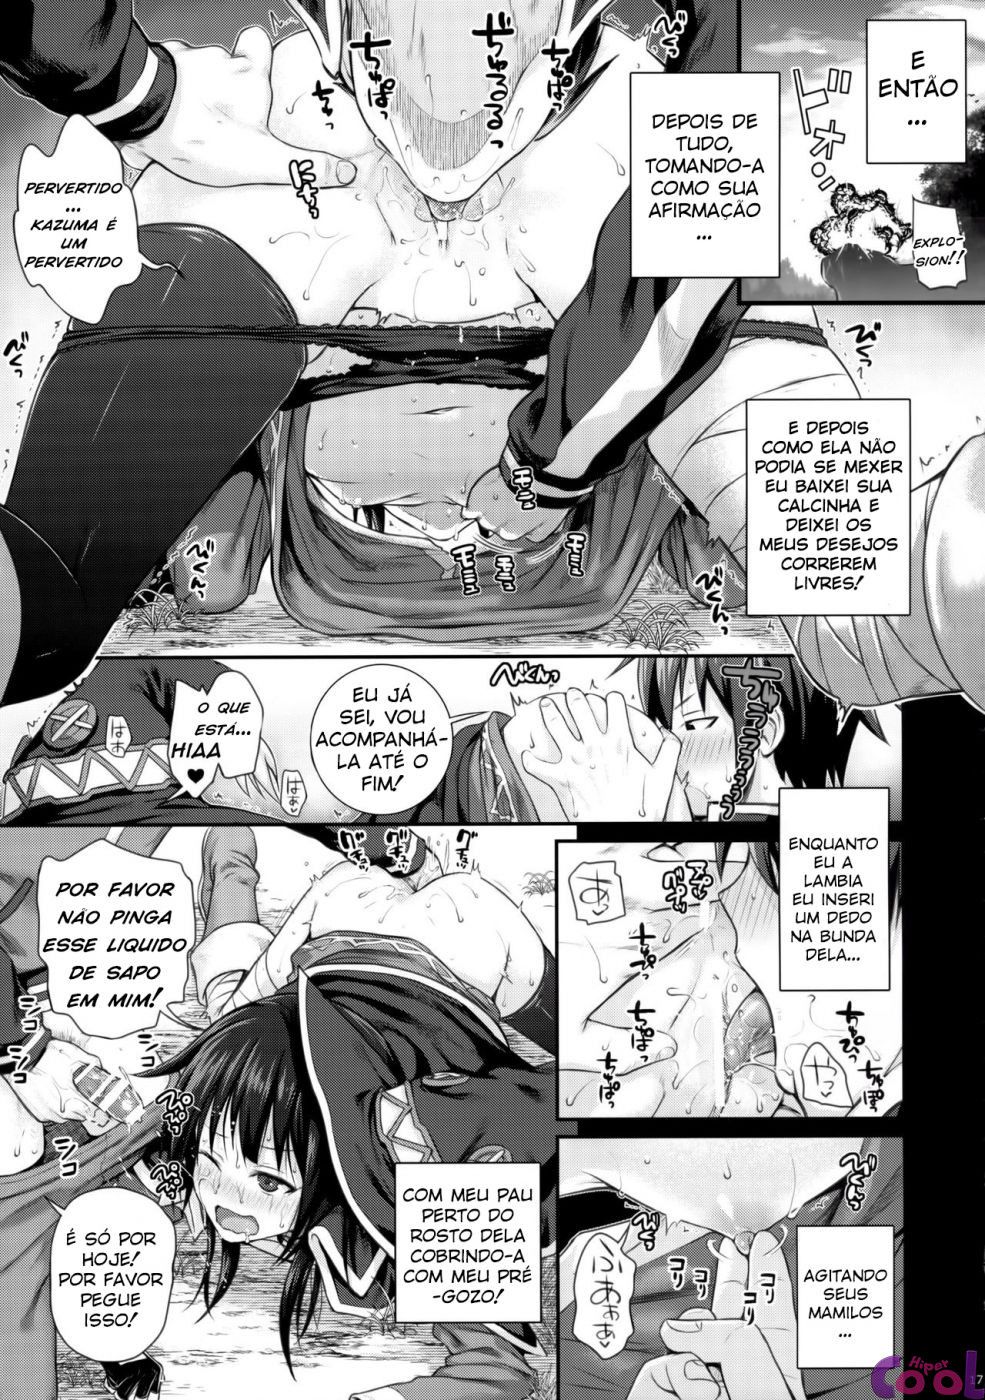 choygedo-chapter-01-page-17.jpg